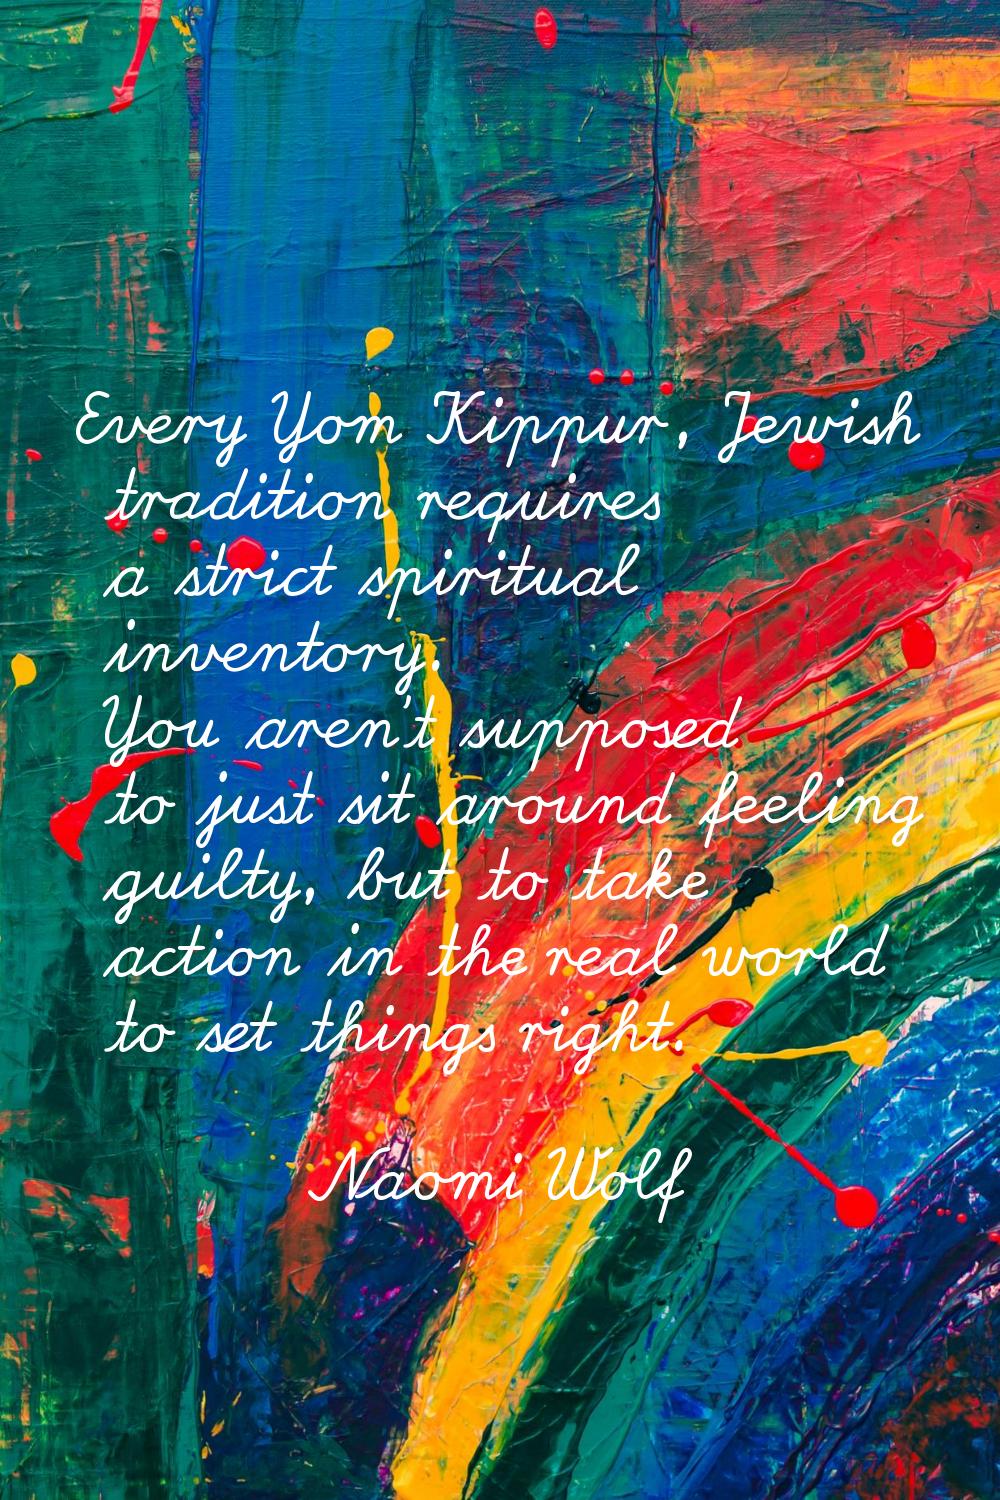 Every Yom Kippur, Jewish tradition requires a strict spiritual inventory. You aren't supposed to ju